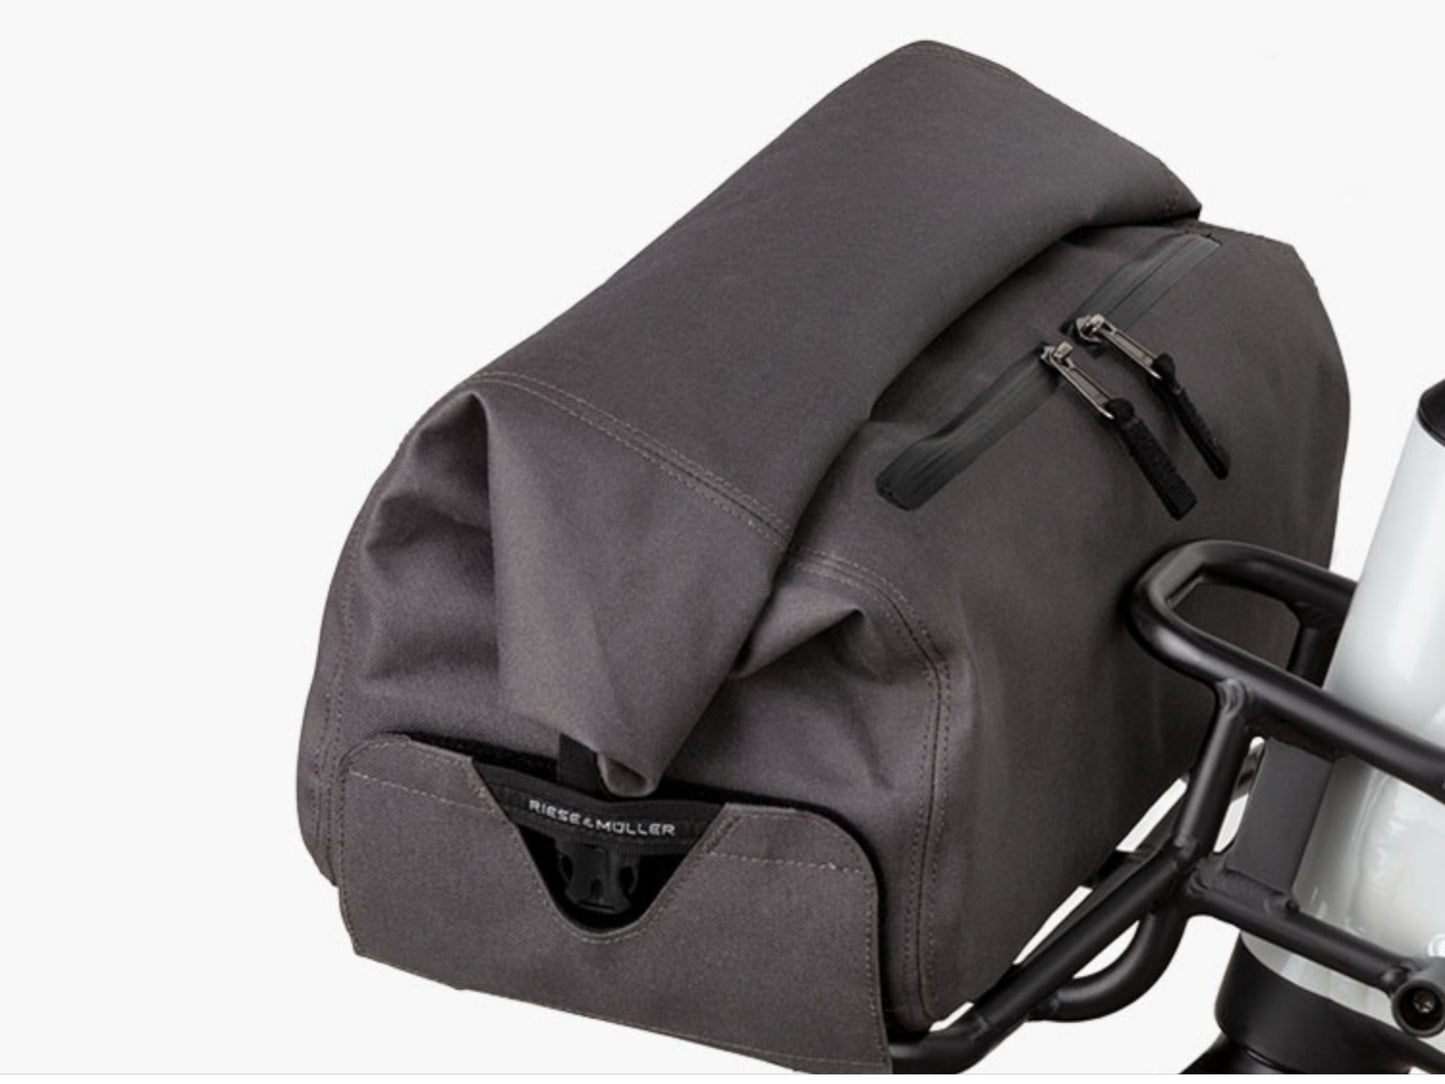 Riese and Muller Homage GT Touring eMTB full suspension close up front carrier bag option